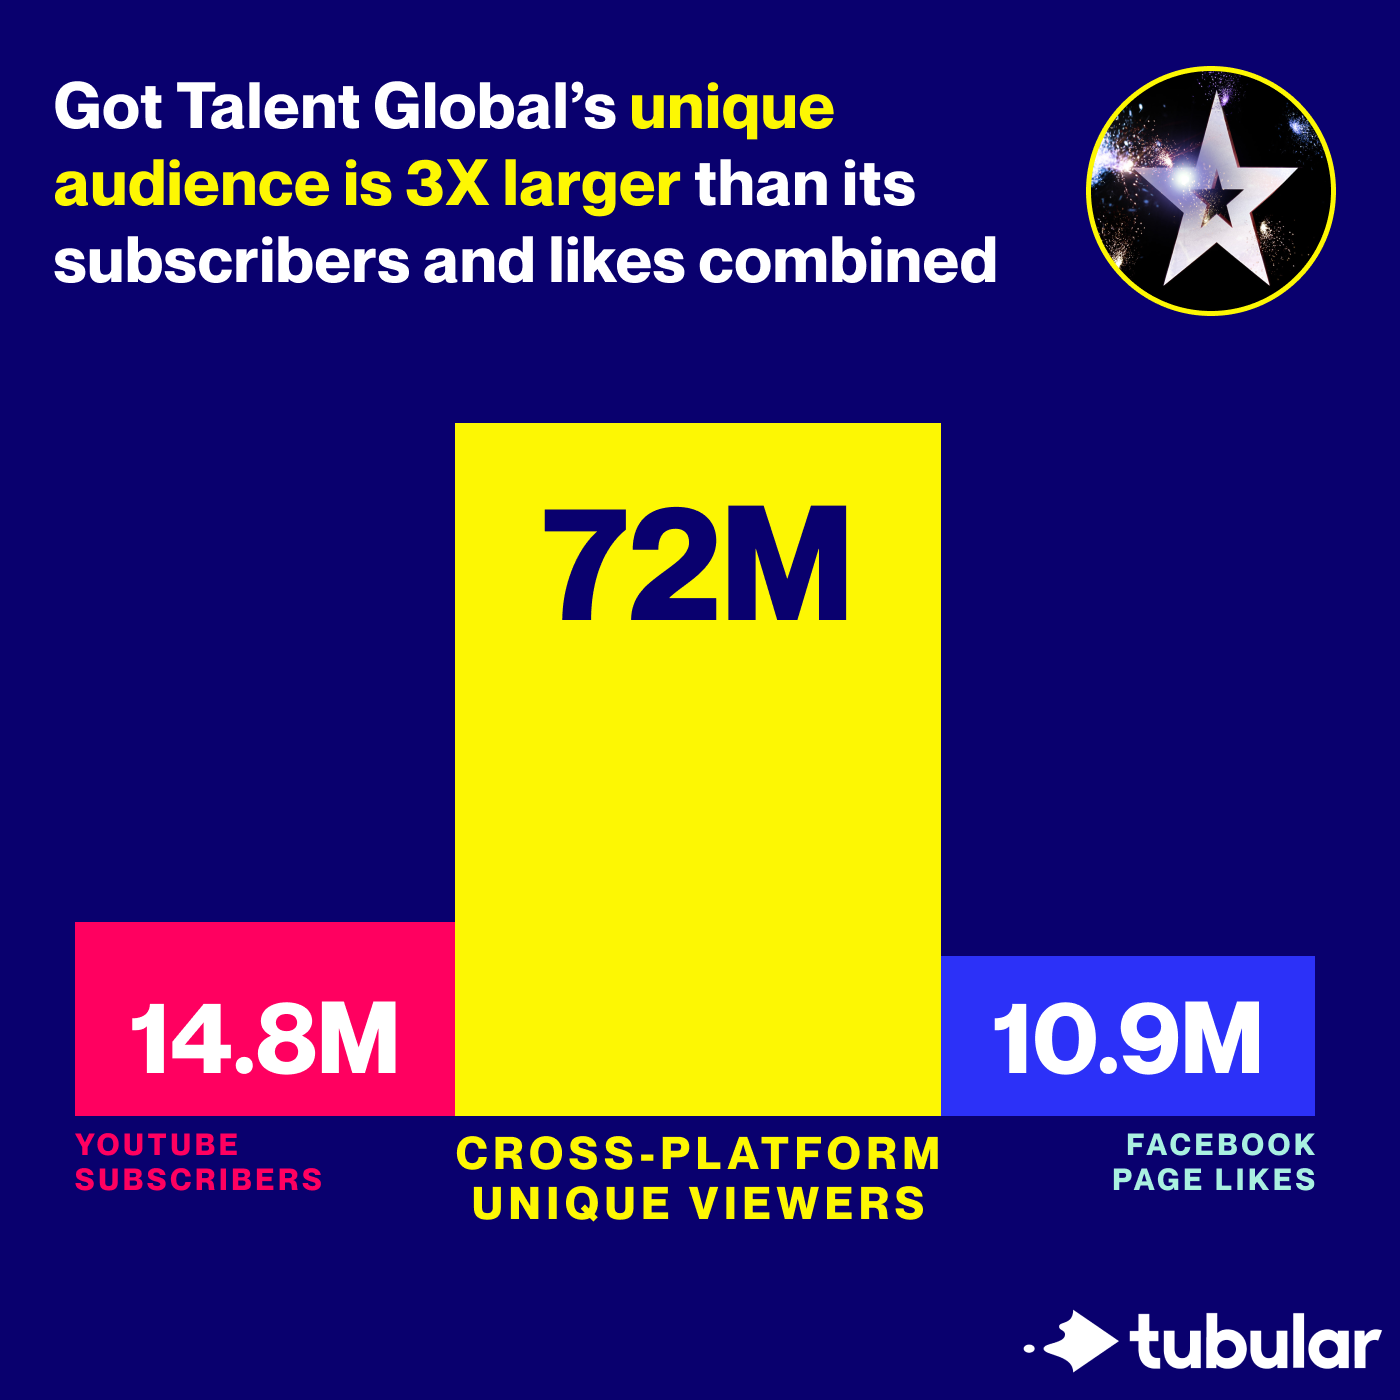 Compare Social Video Directly to TV with Tubular Audience Ratings ™